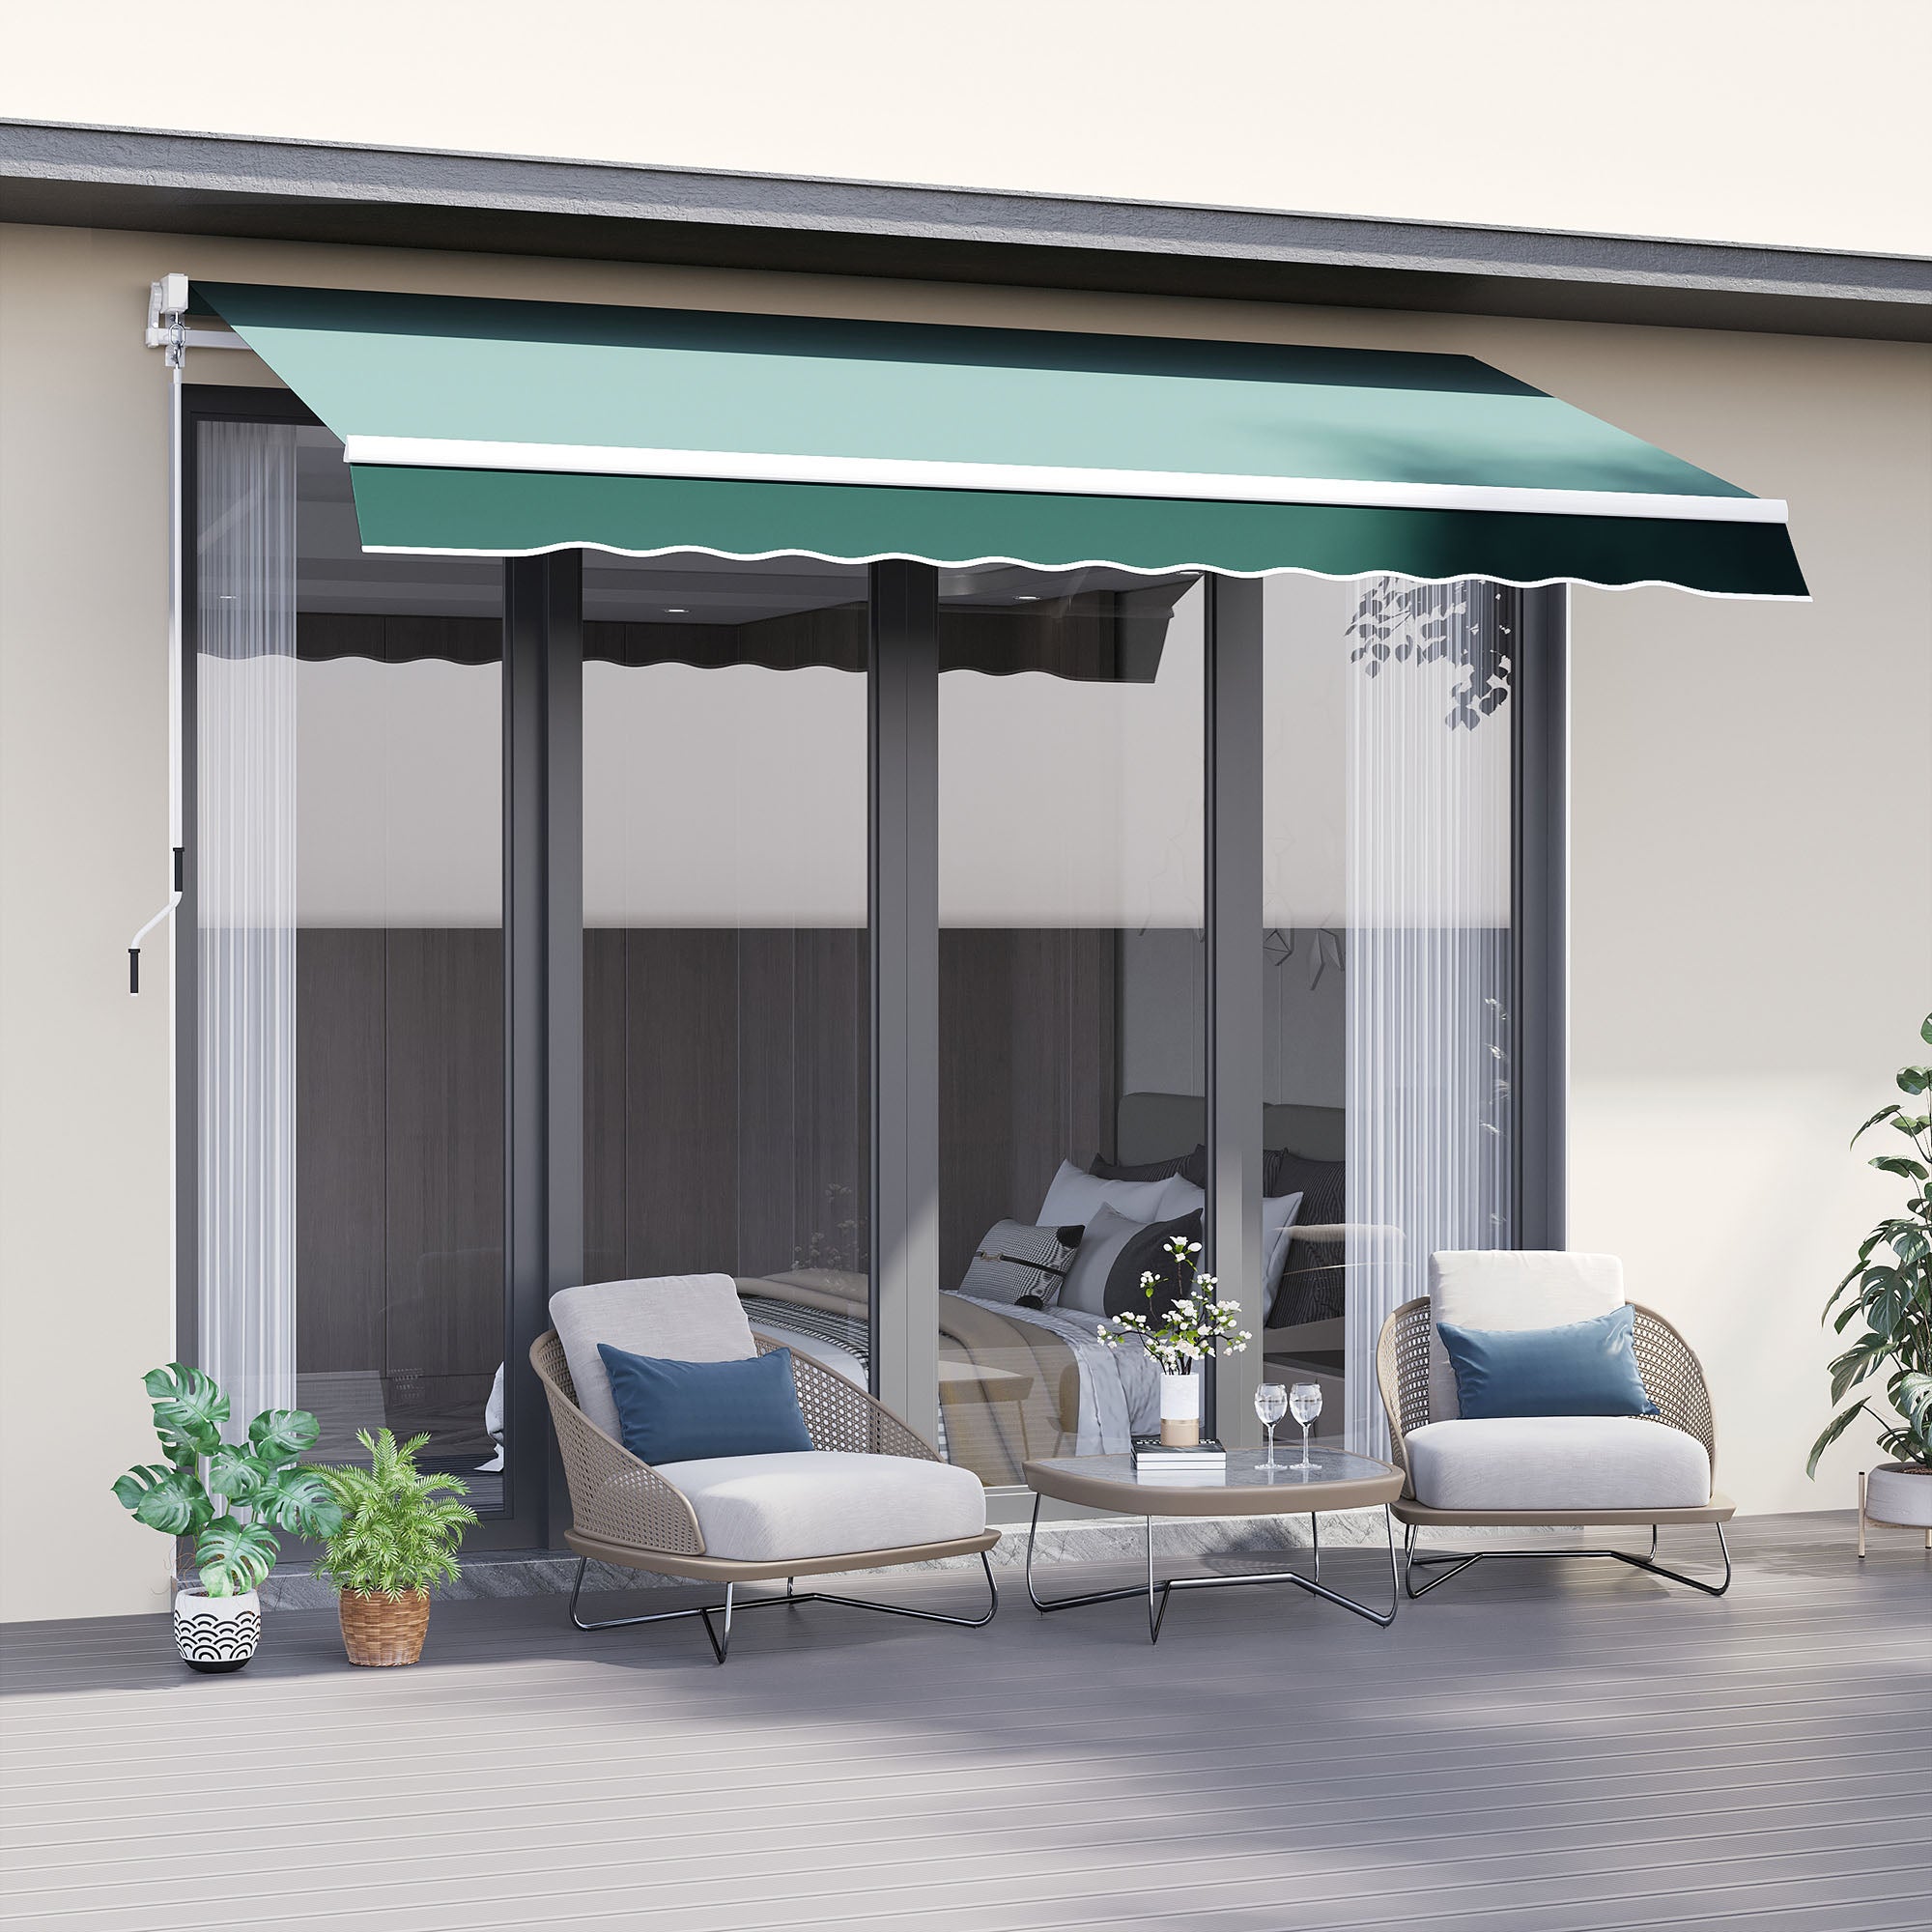 Outsunny 2.5m x 2m Garden Patio Manual Awning Canopy Sun Shade Shelter Retractable with Winding Handle Green - Inspirely